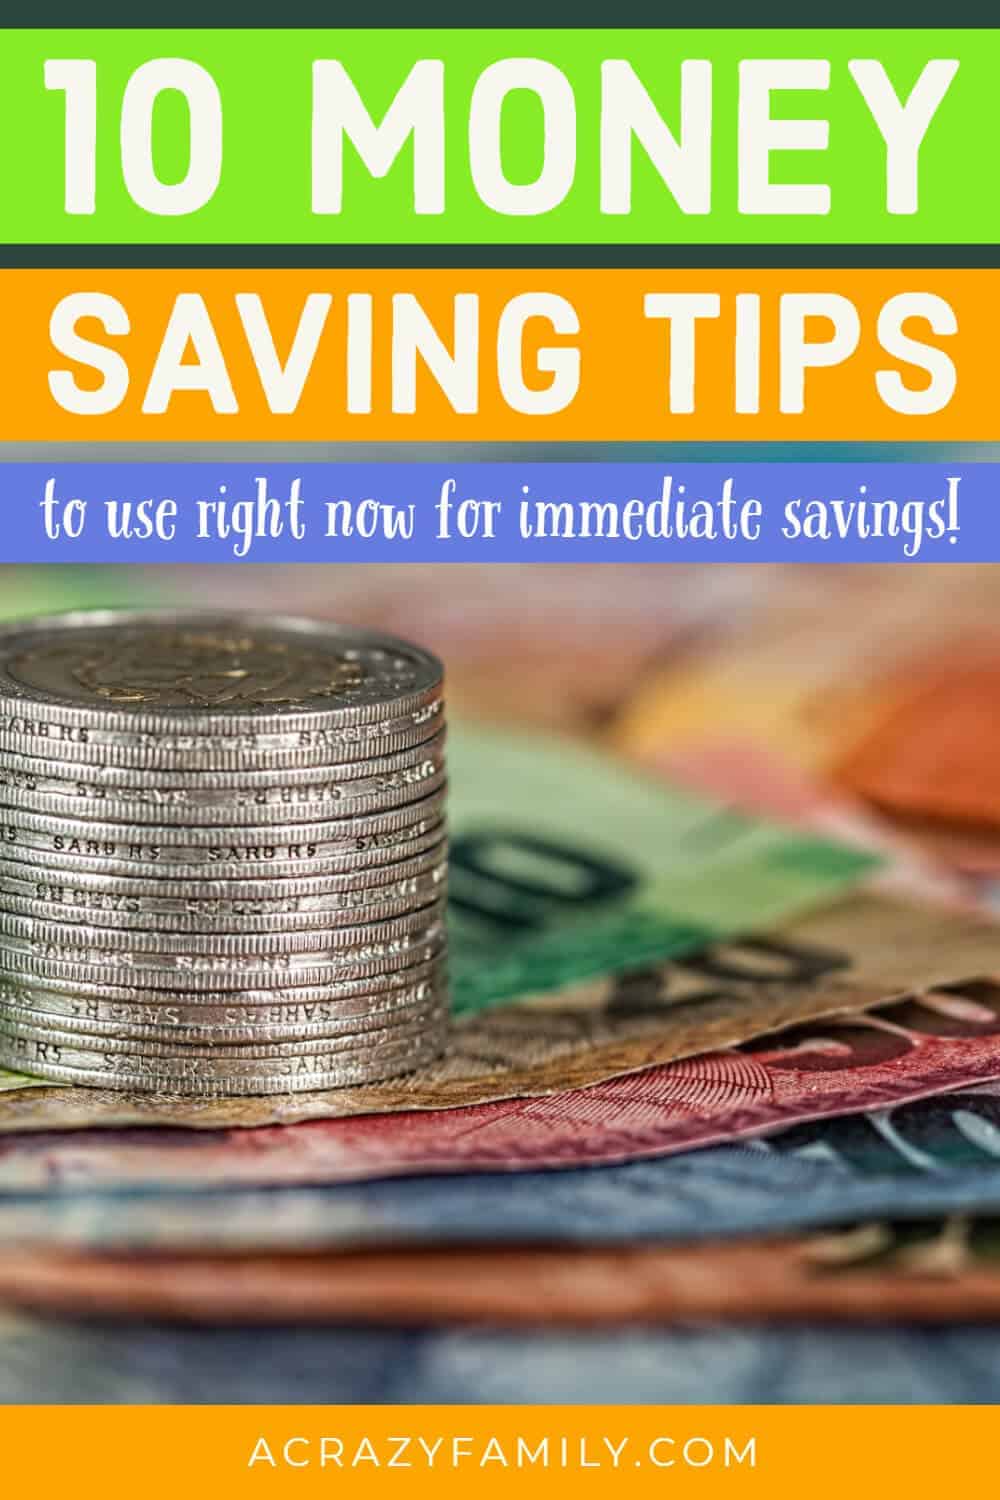 10 Money Saving Tips To Save You Money Right Now